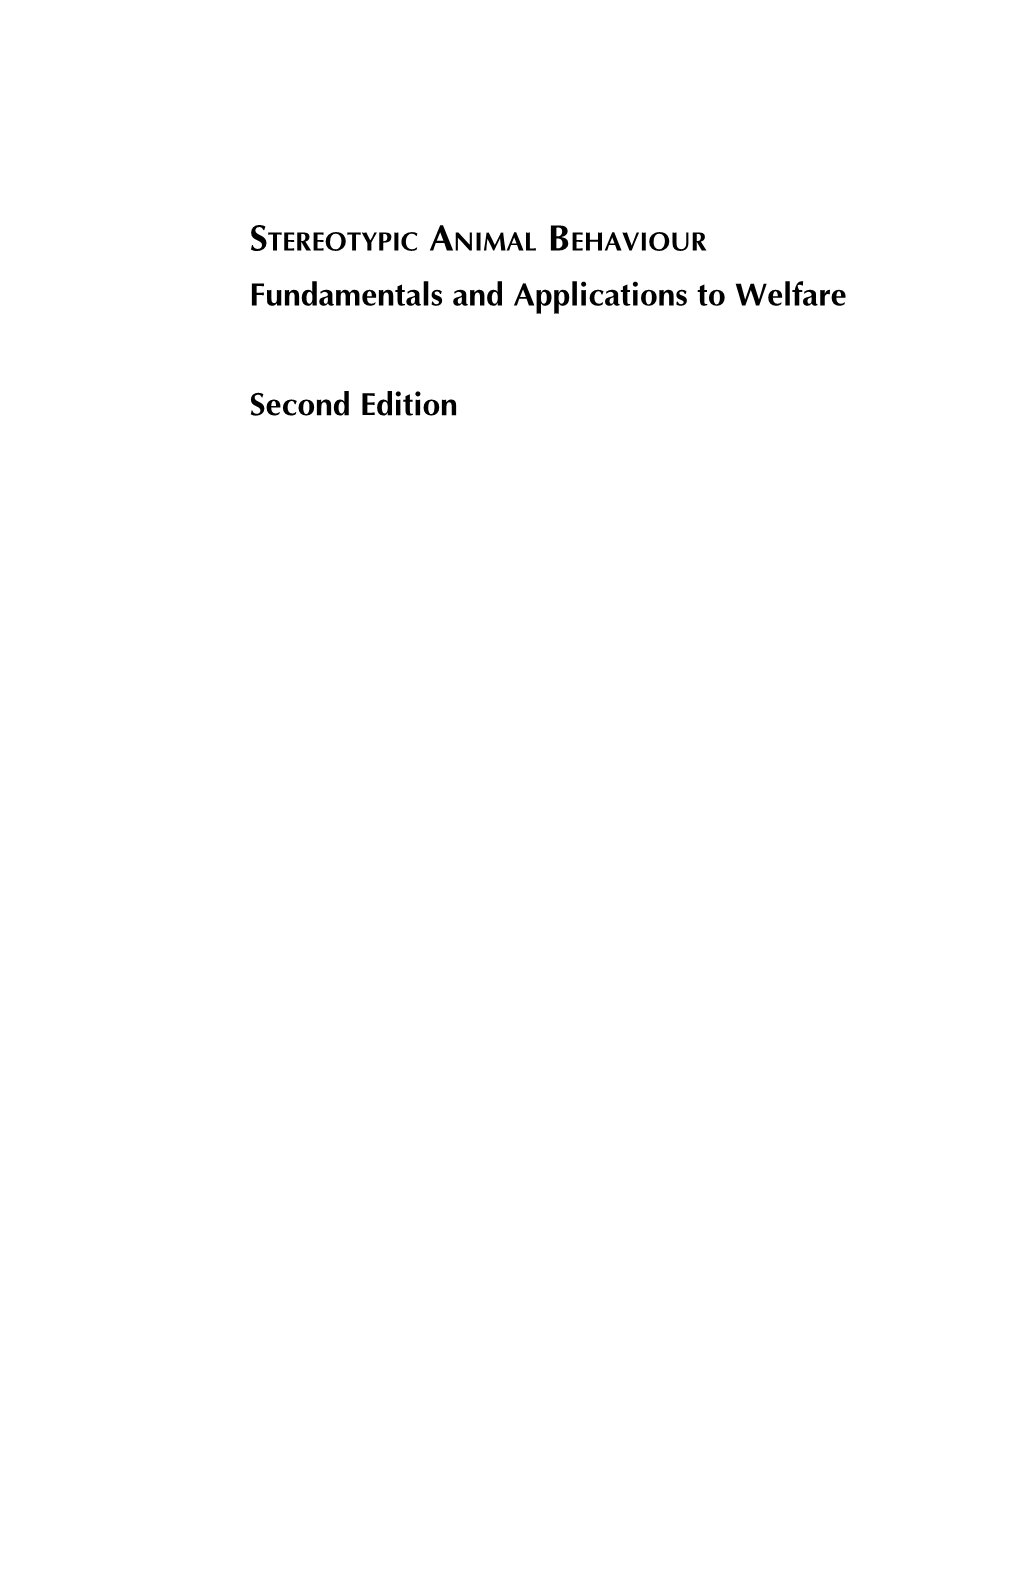 STEREOTYPIC ANIMAL BEHAVIOUR Fundamentals and Applications to Welfare